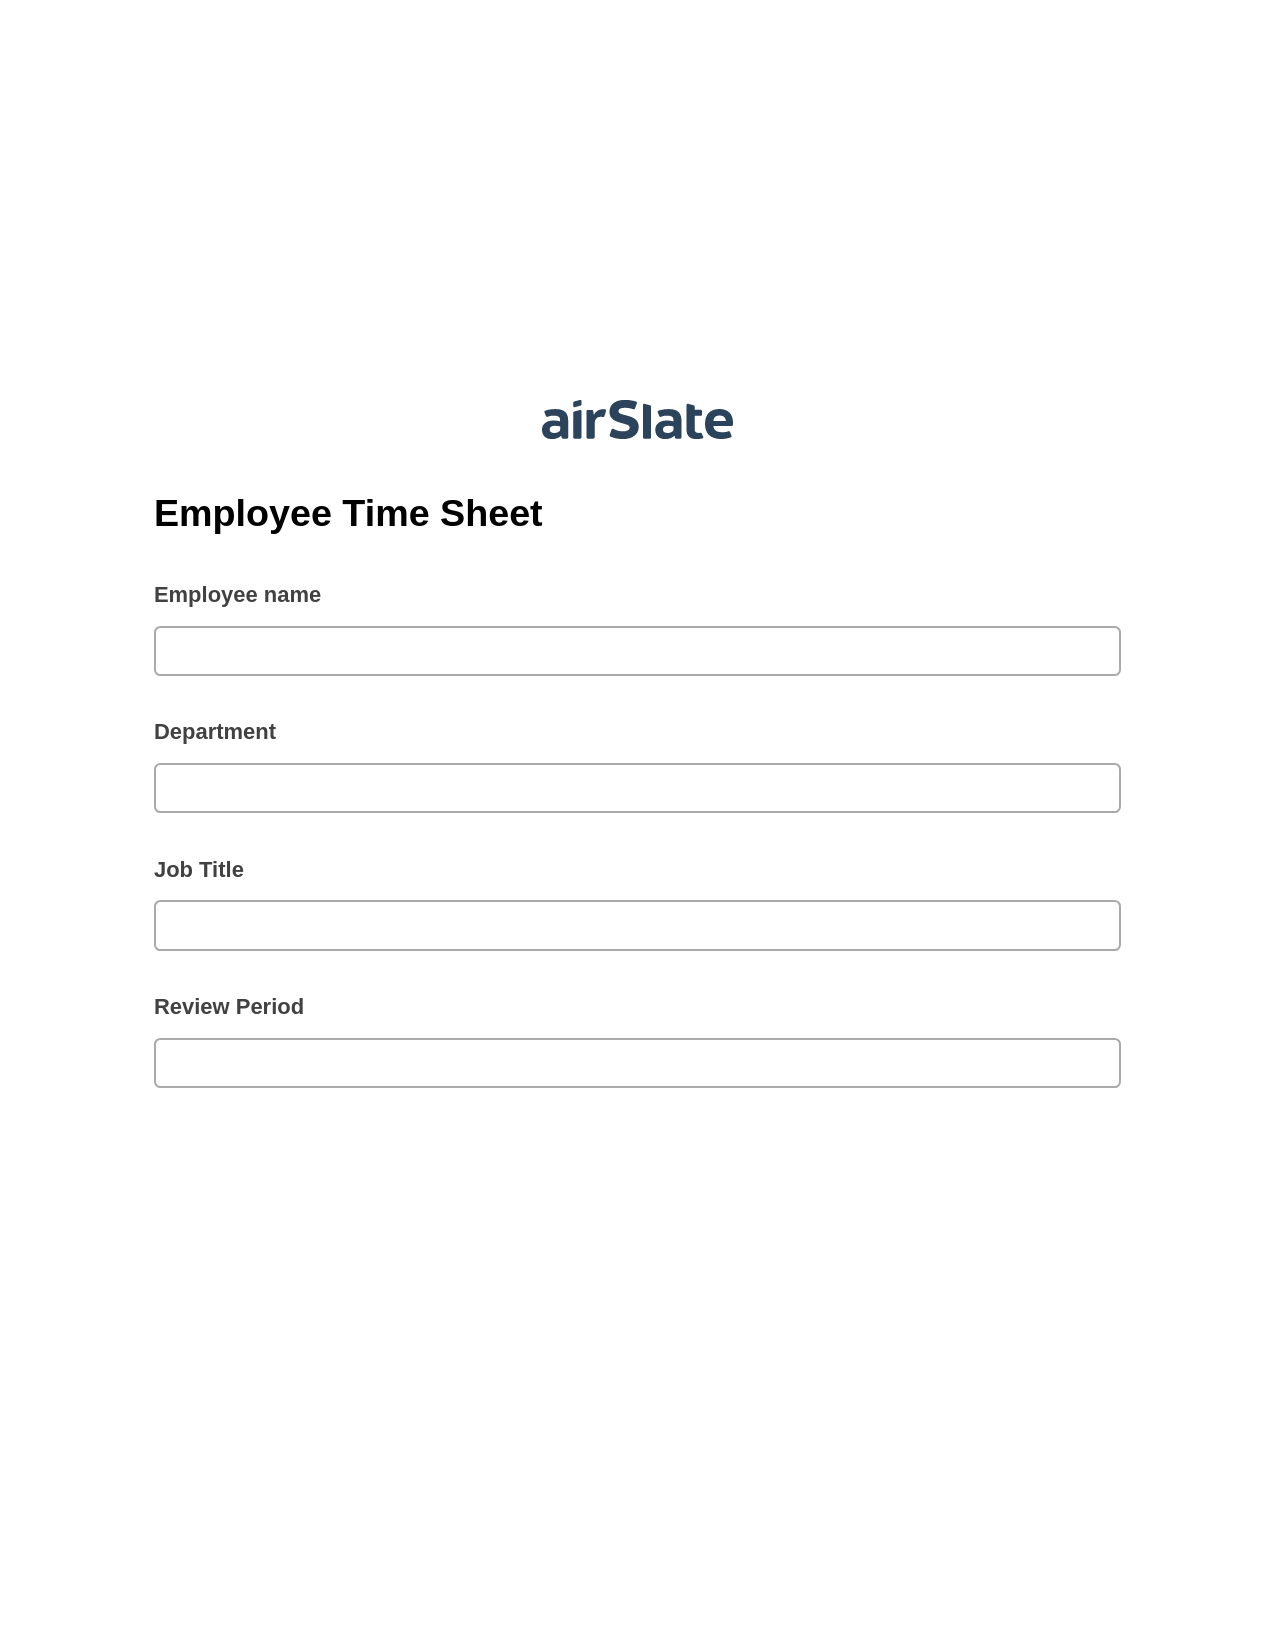 Multirole Employee Time Sheet Pre-fill from Excel Spreadsheet Bot, Create Salesforce Records Bot, Export to NetSuite Bot